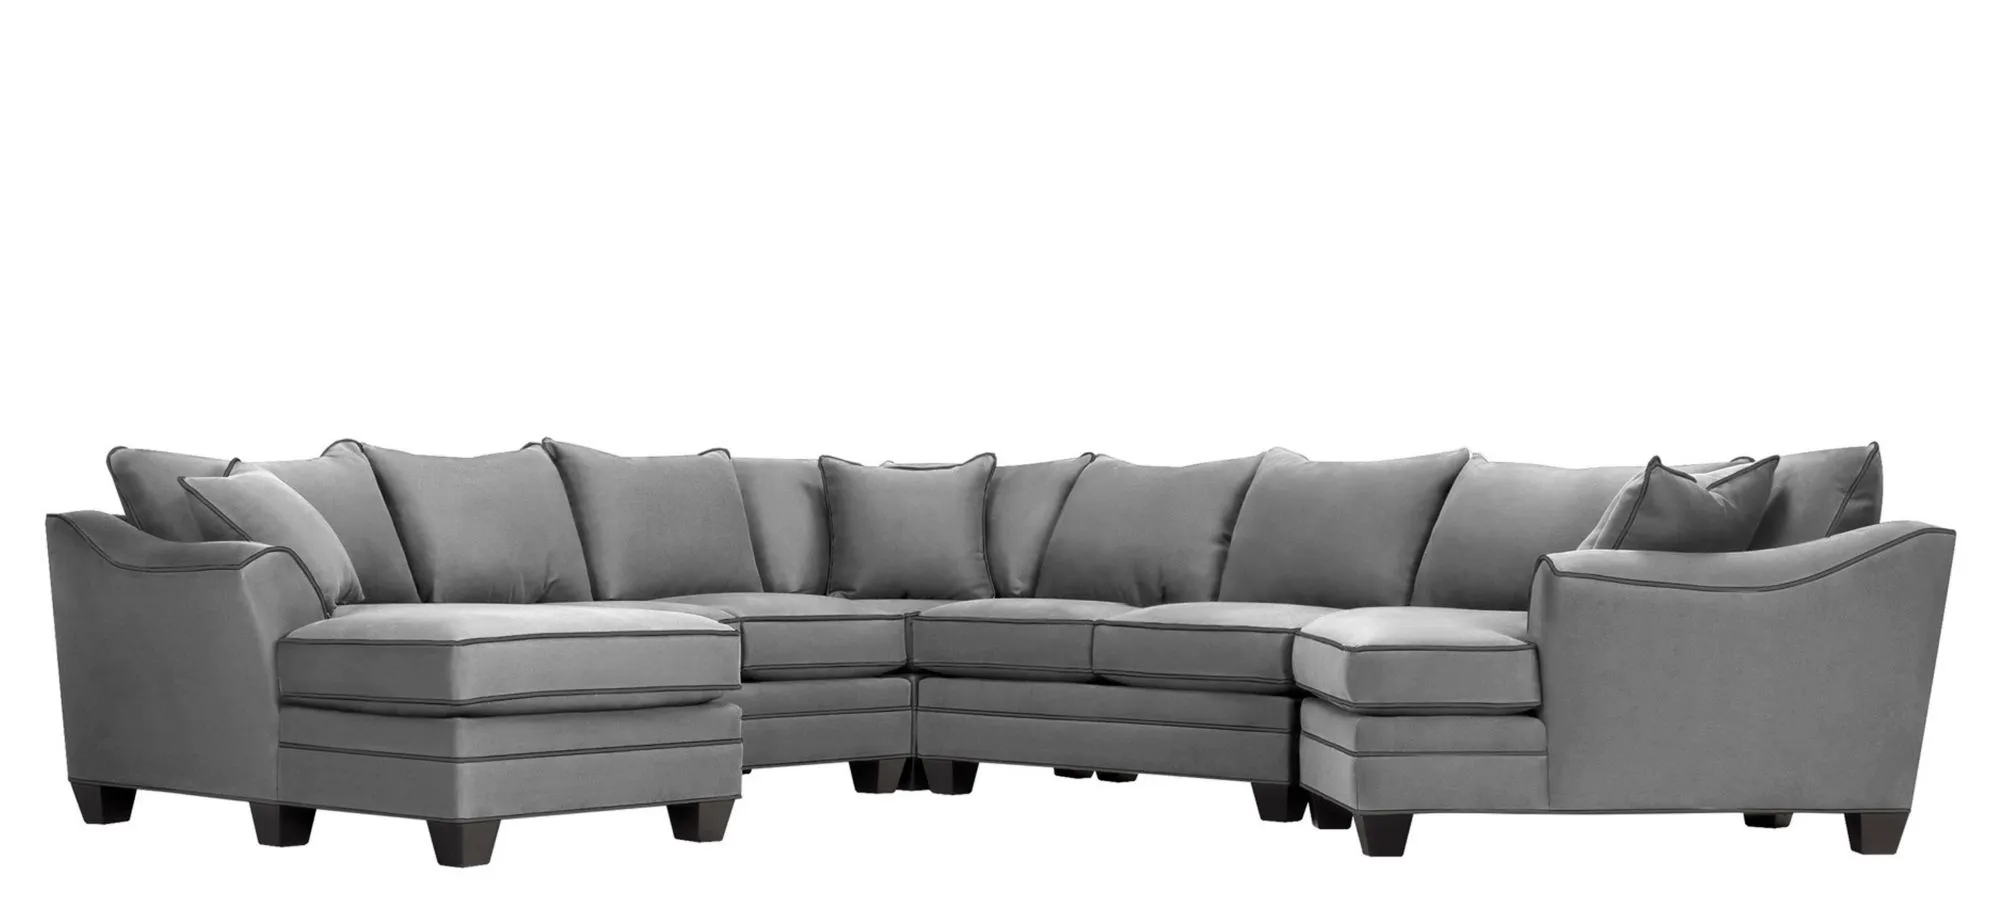 Foresthill 5-pc. Left Hand Facing Sectional Sofa in Suede So Soft Platinum/Slate by H.M. Richards